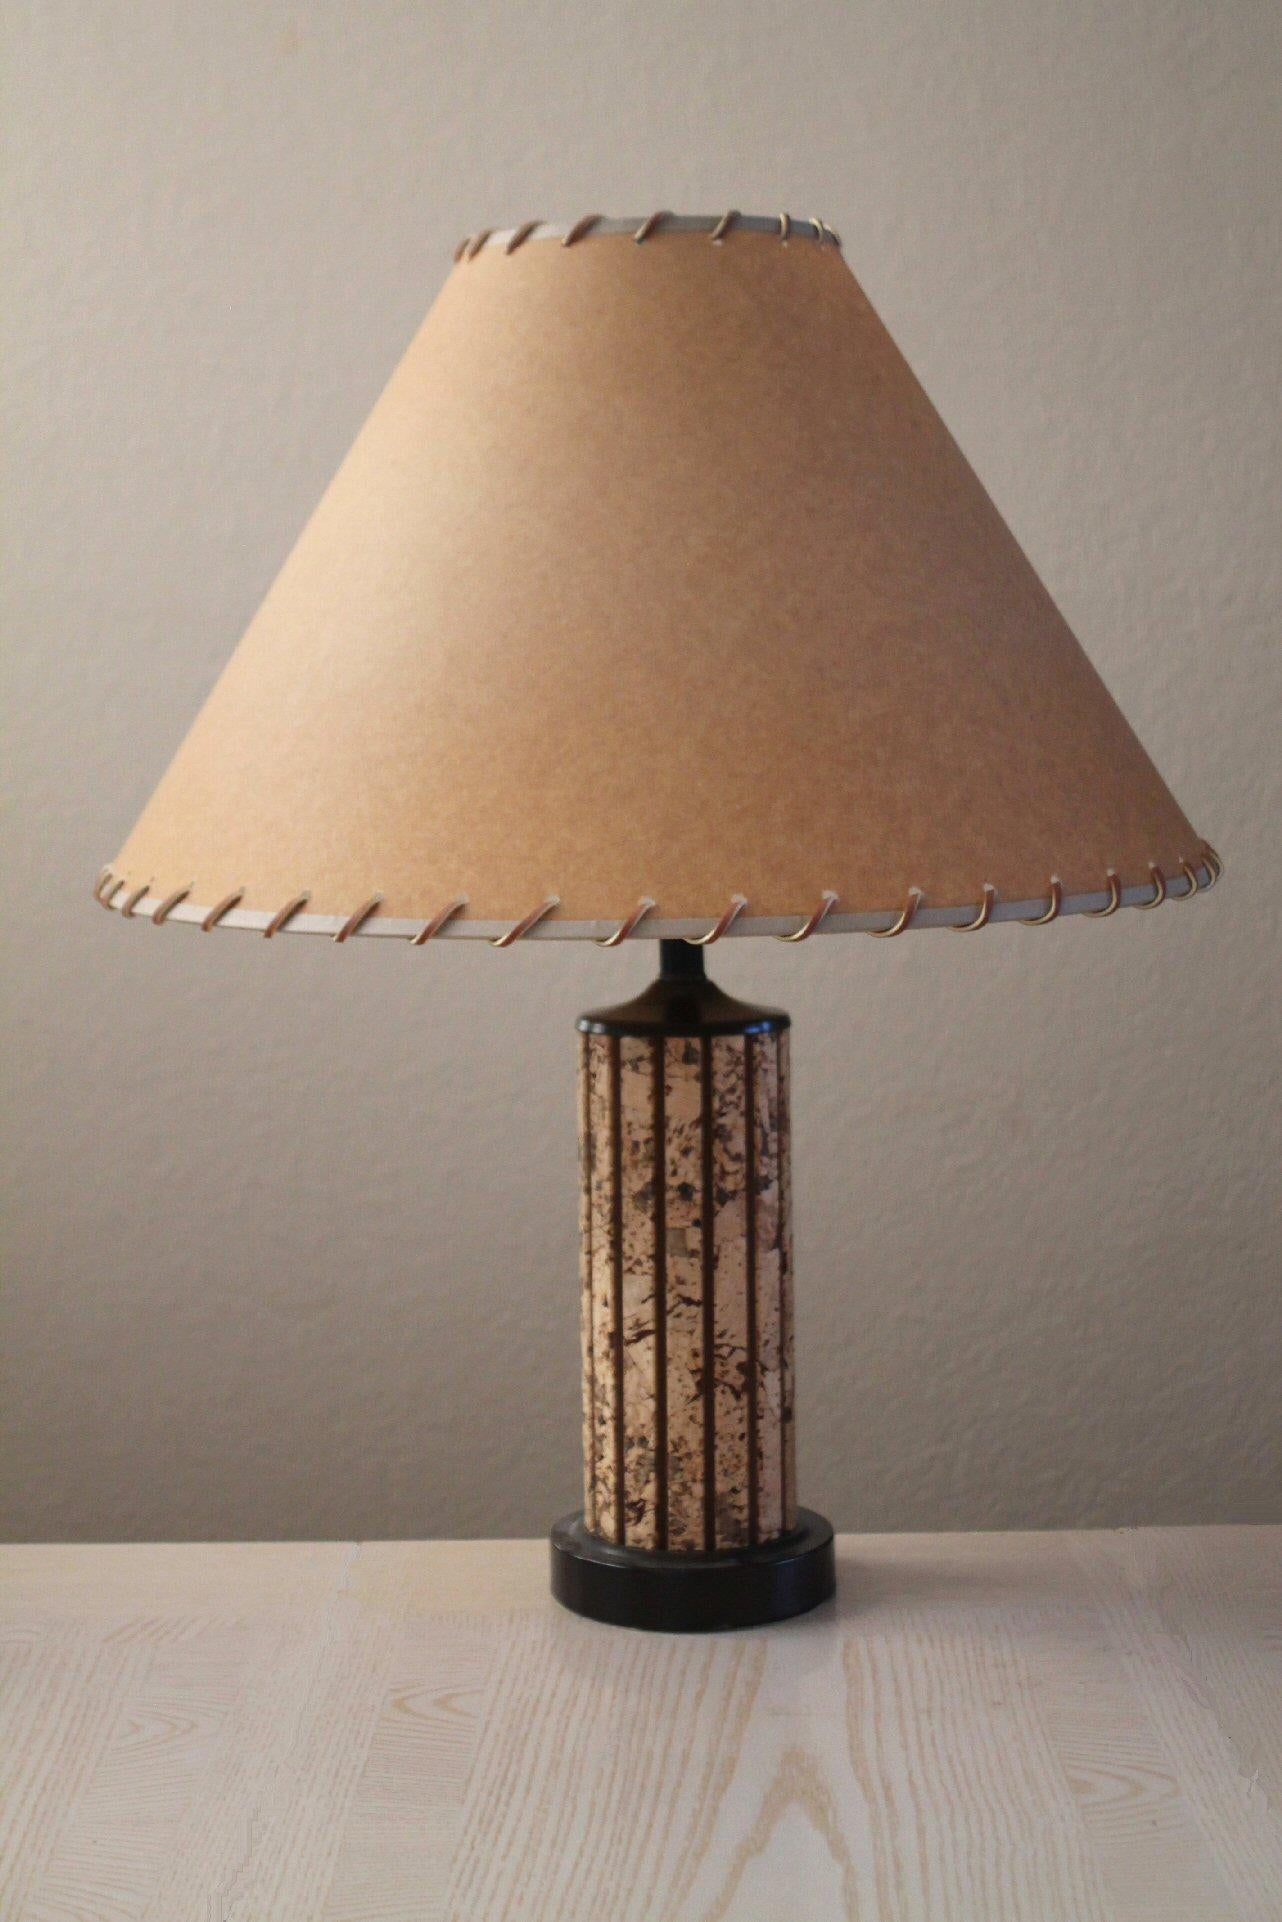 Mid-Century Modern Gorgeous Cork Mid Century Modern Table Lamp! Laced Shade 1960s Decor Lighting For Sale